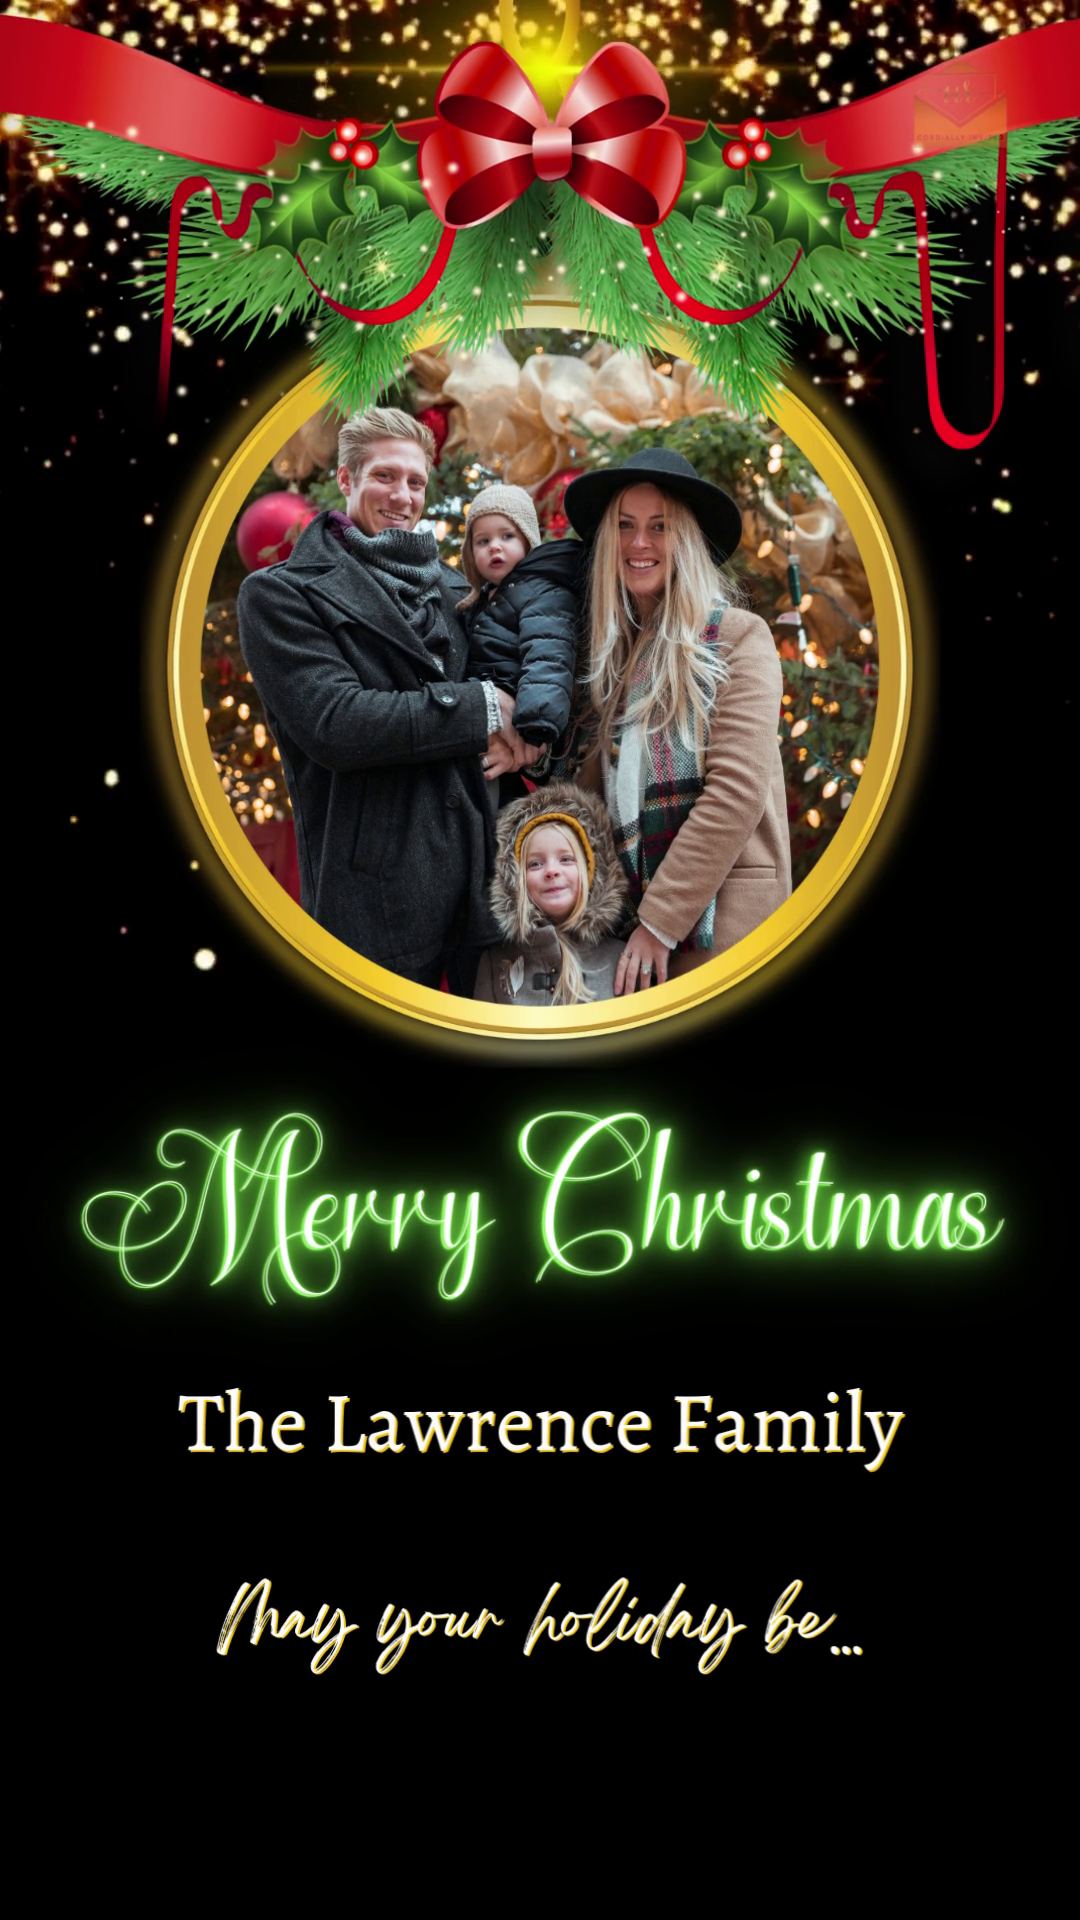 Family posing with a Neon Green Oval Ornament Photo Christmas Video Ecard, editable via Canva for personalized digital invitations.